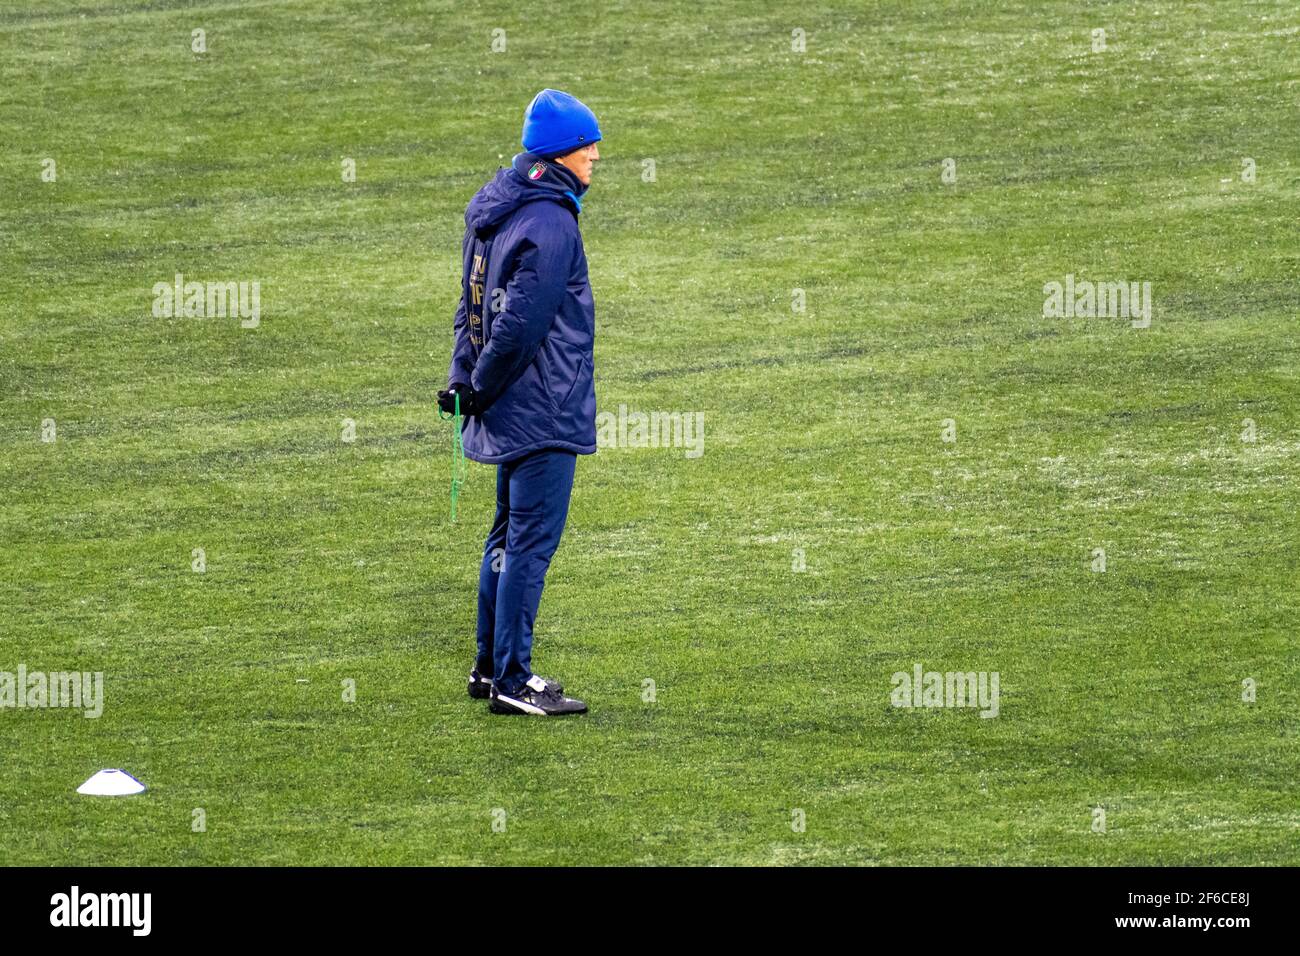 CT coach Roberto Mancini during the training before Lithuania - Italy before World Cup qualifying match Stock Photo